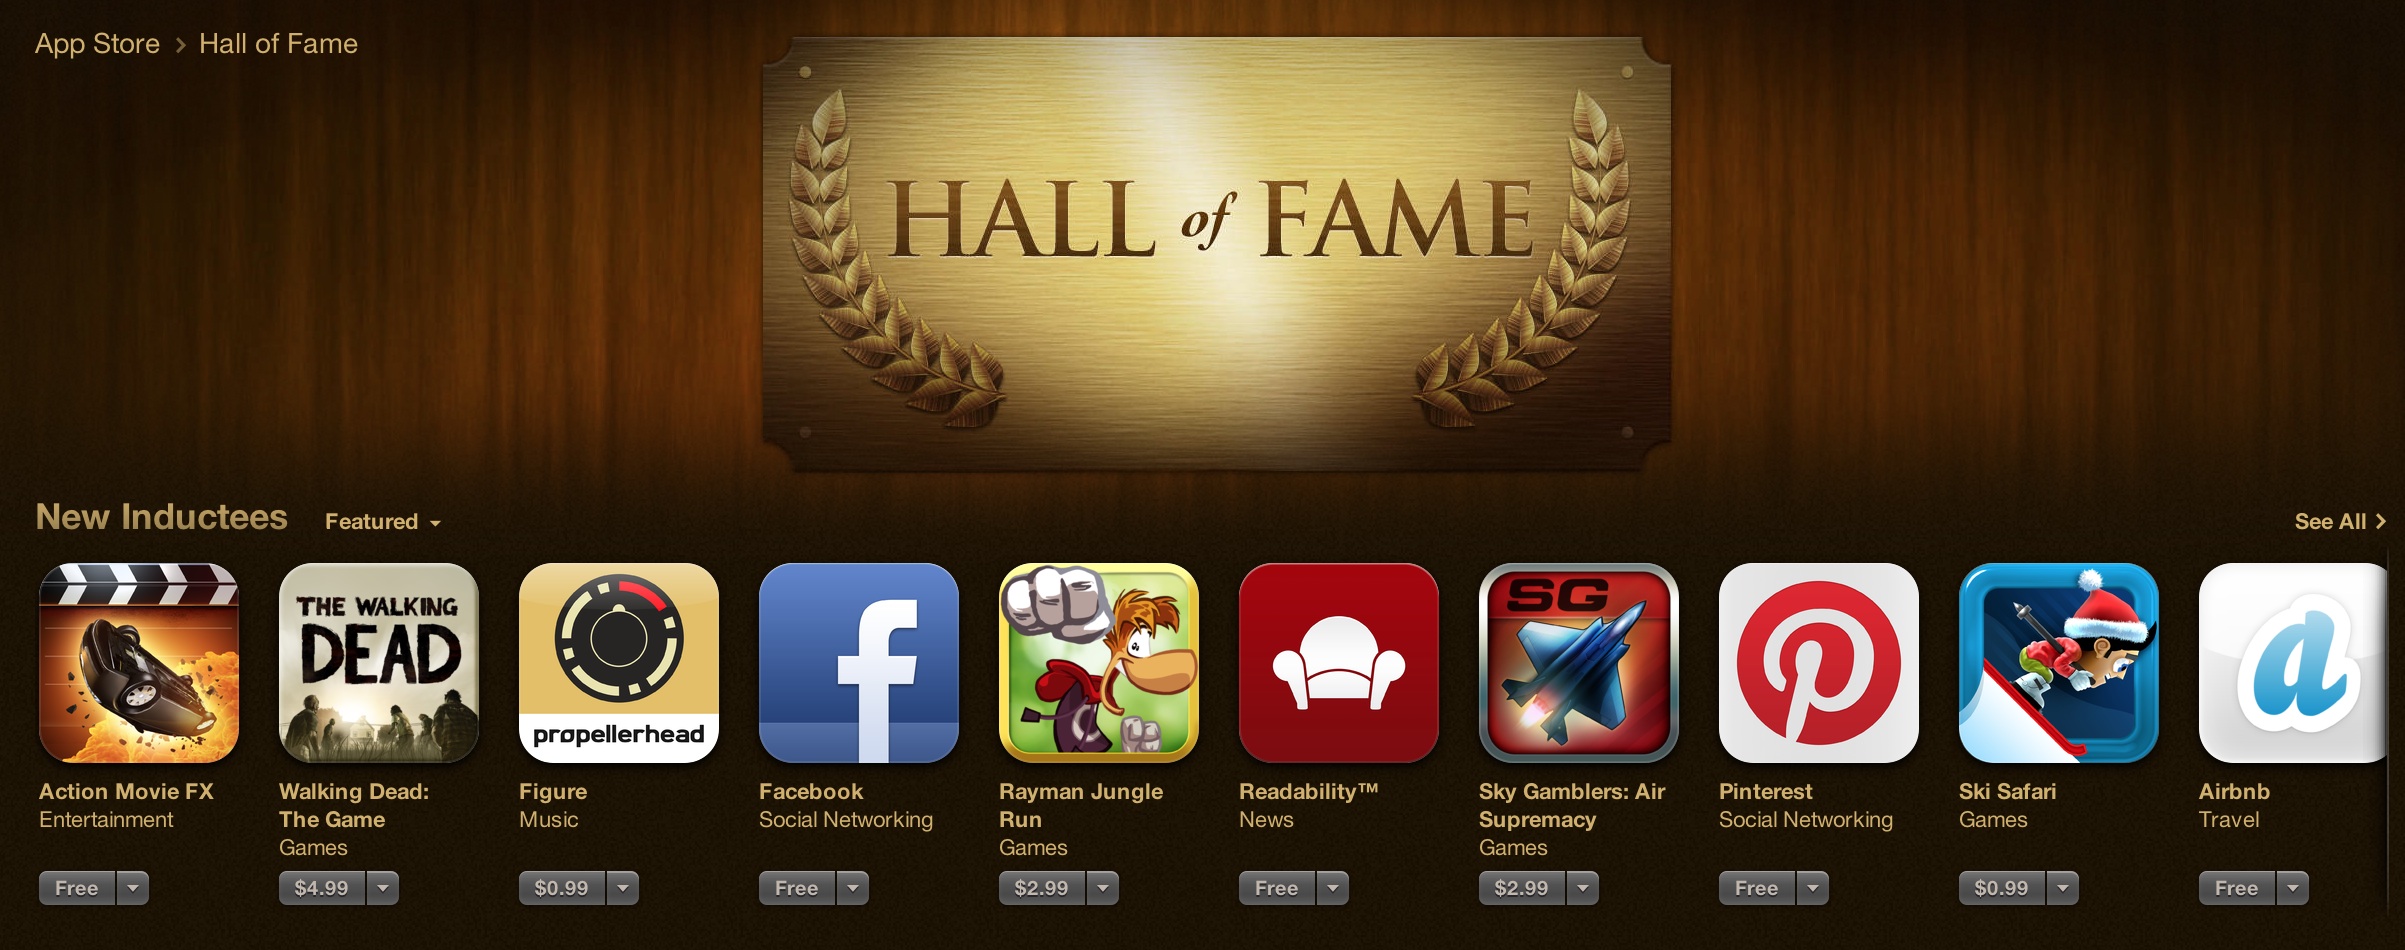 App-store-hall-of-fame